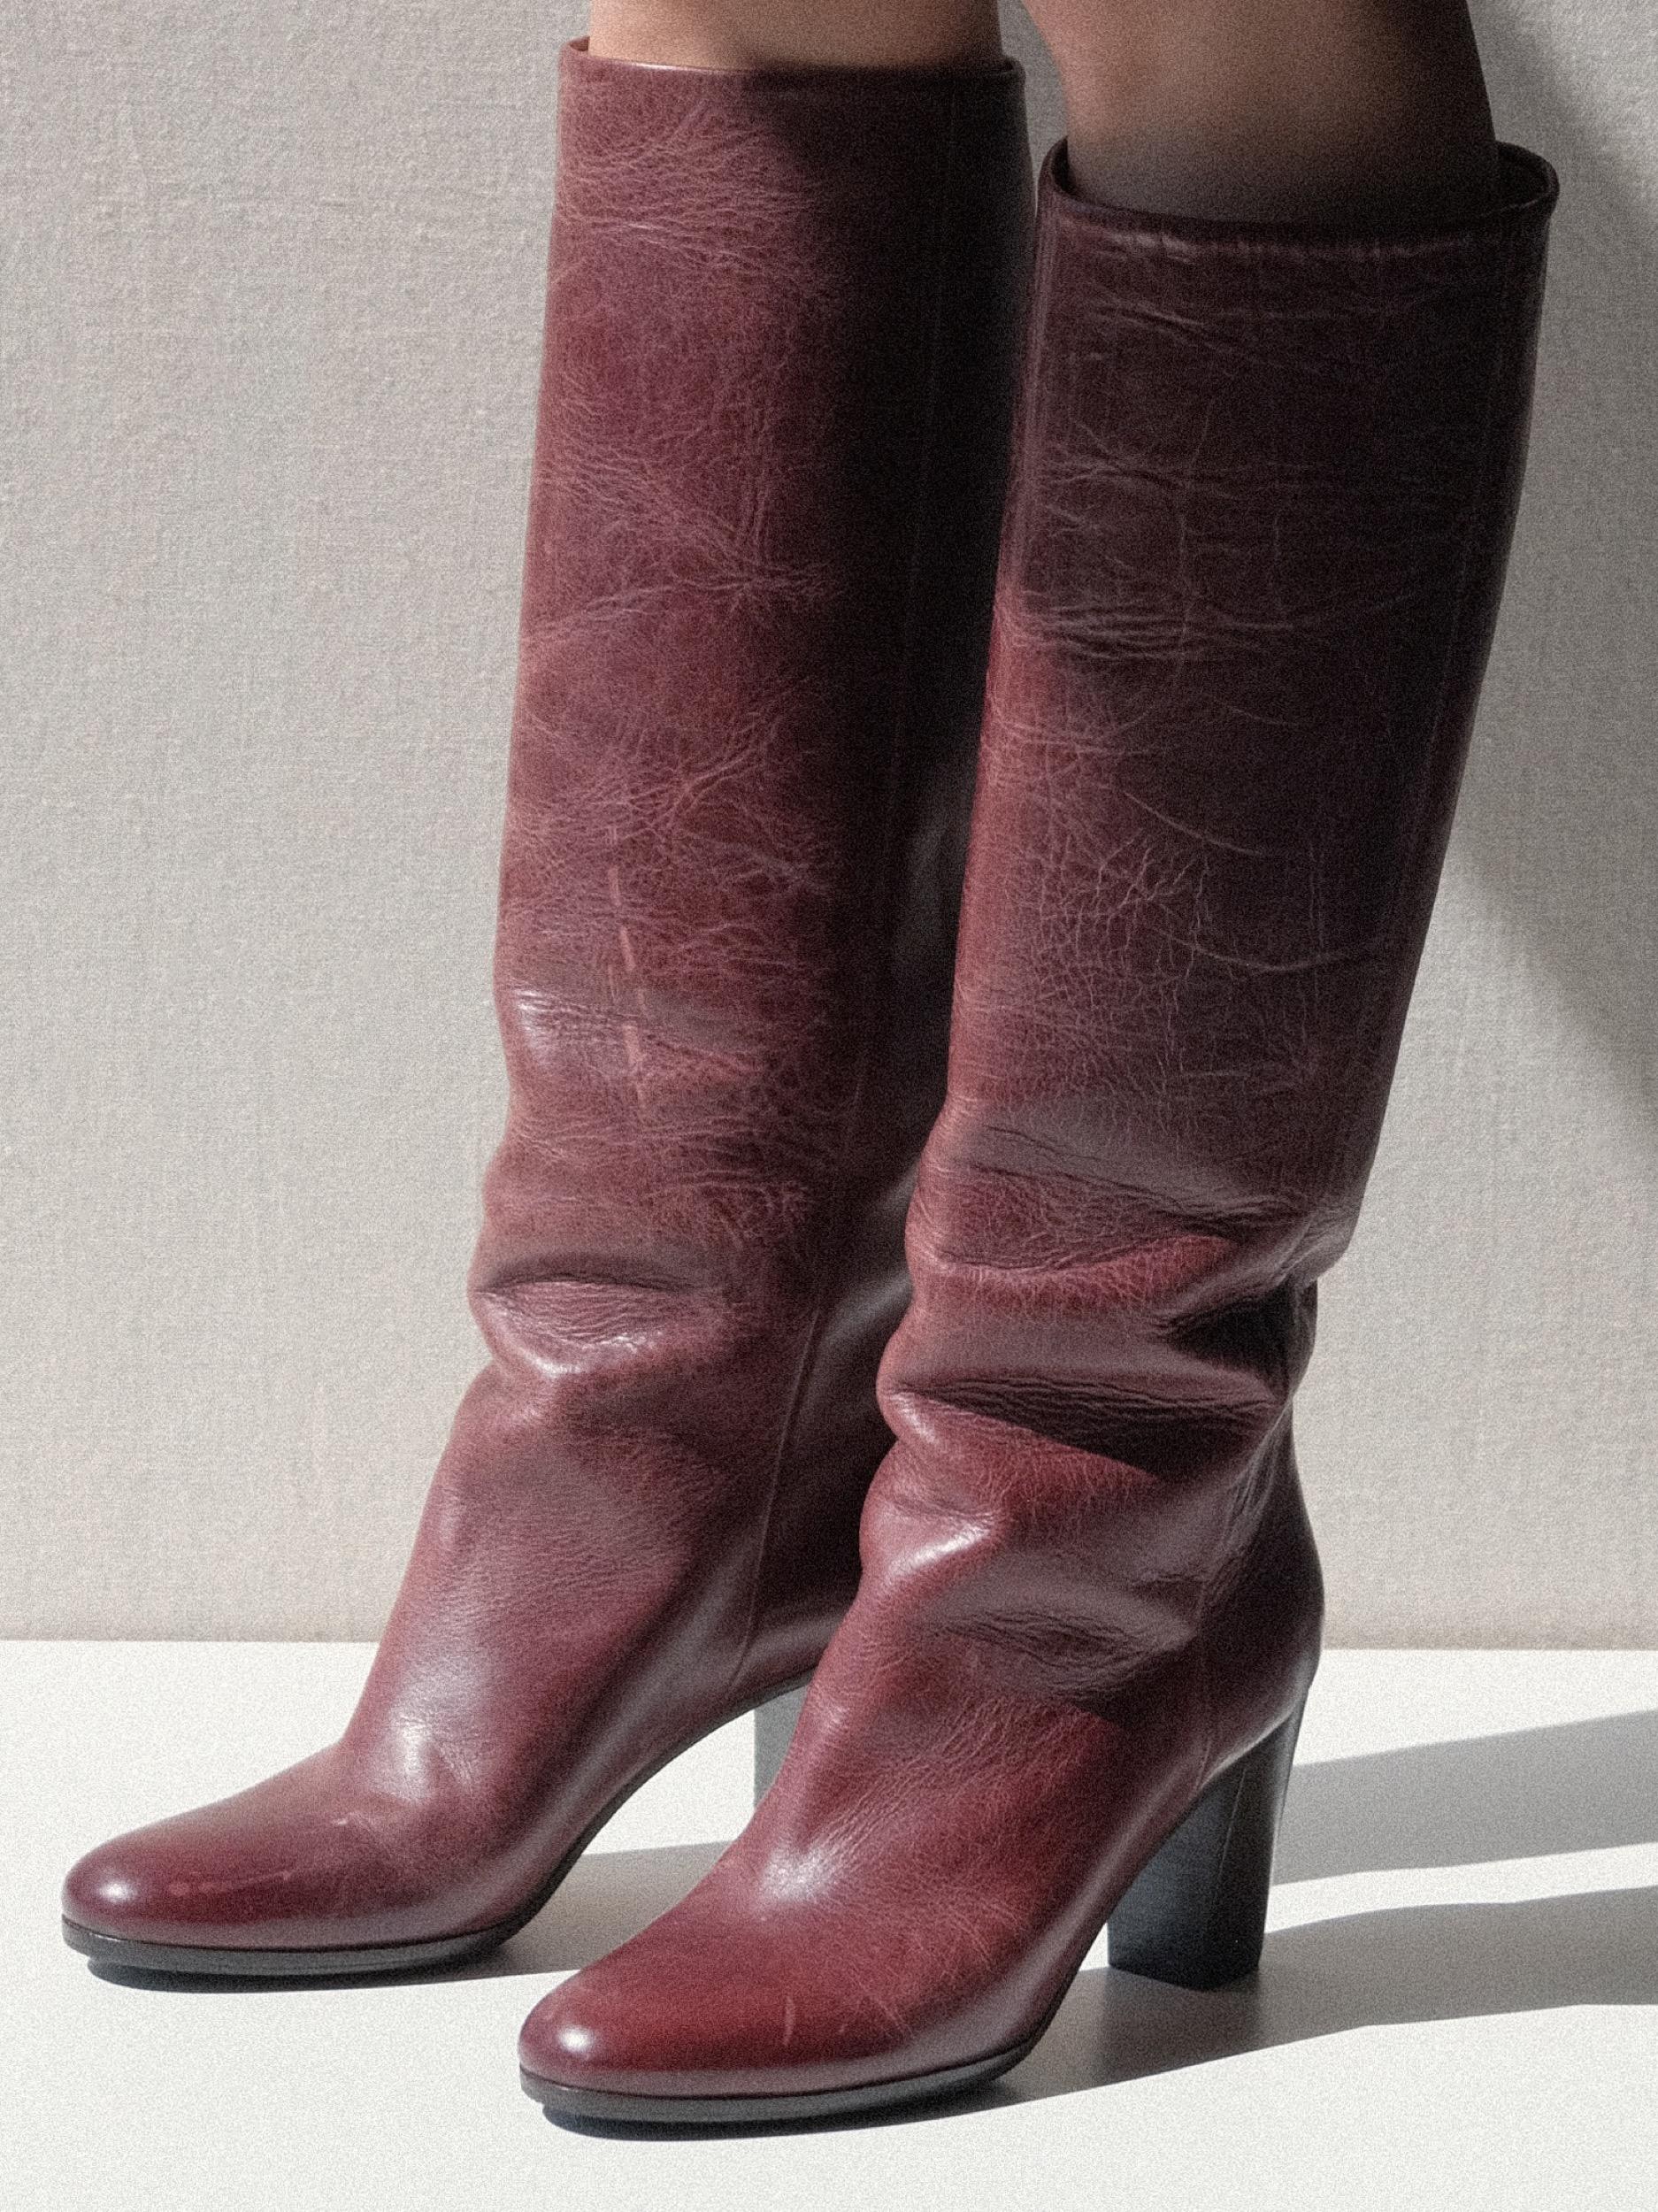 Martin Margiela Riding Boots Deep Red Size 37 Replica Line 22 For Sale 14